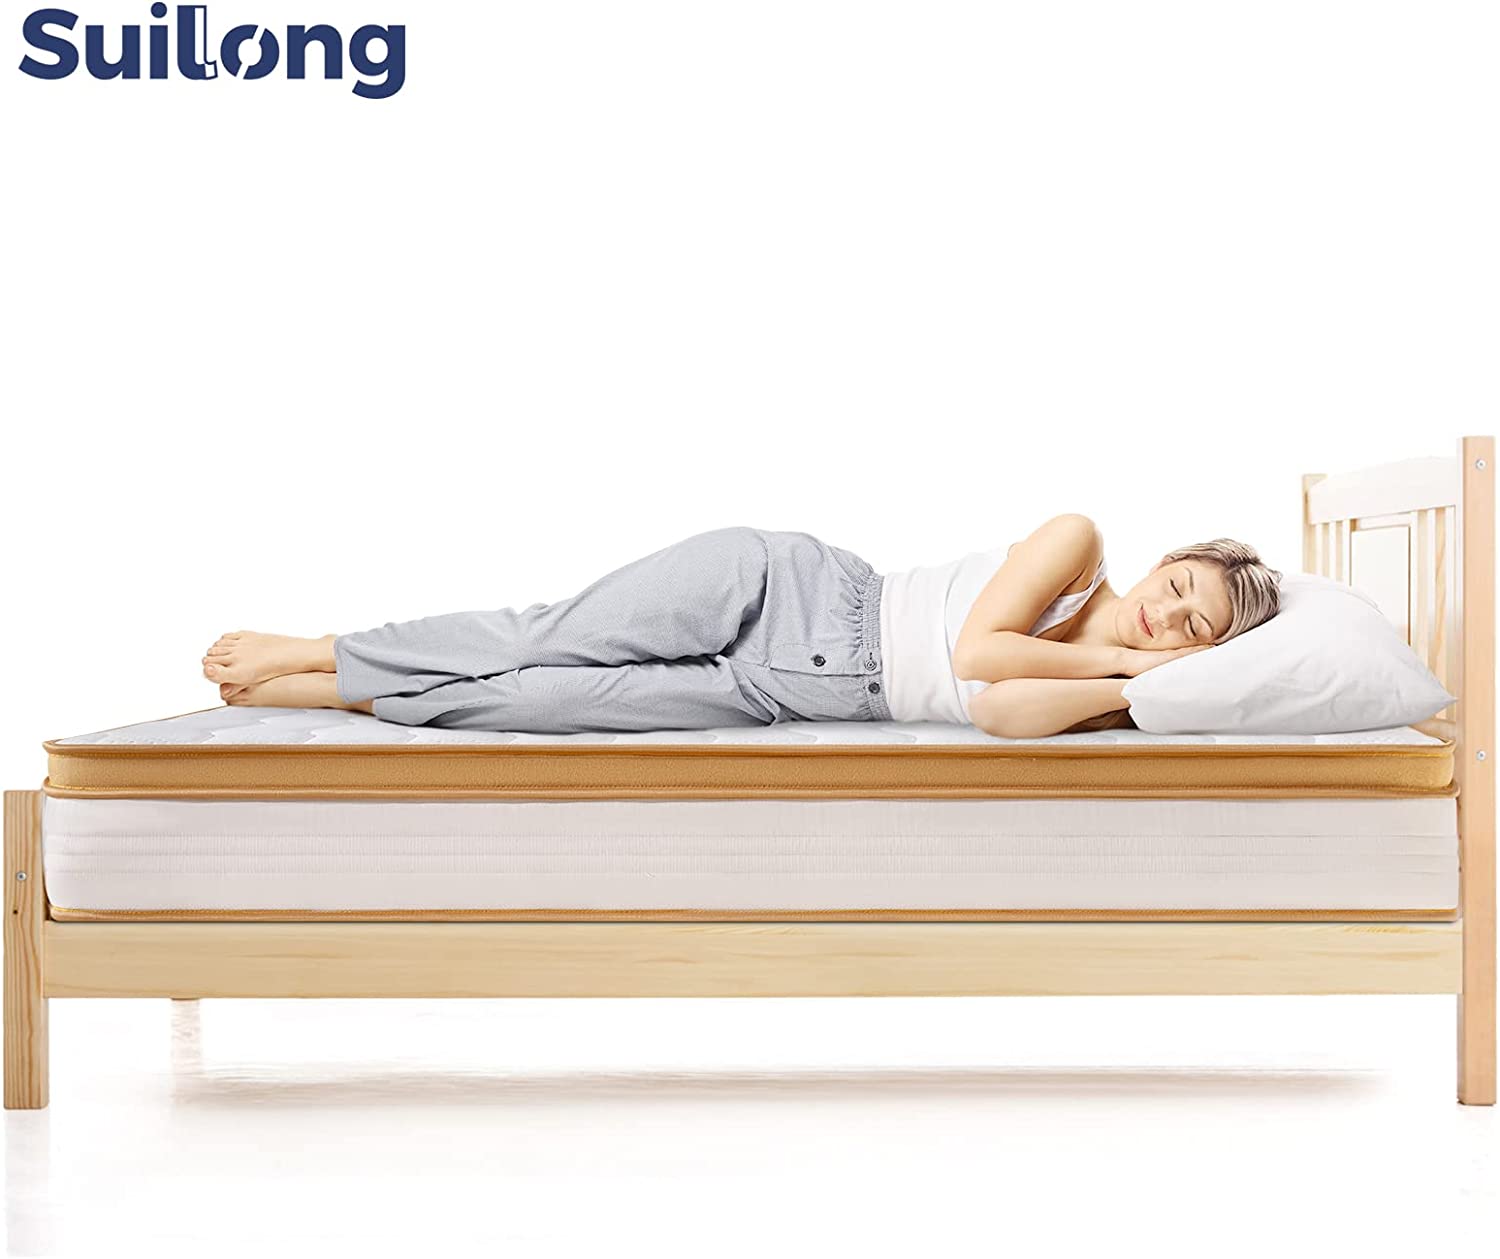 Suilong 24cm Hybrid Mattress - A Comfortable and Supportive Sleep Experience